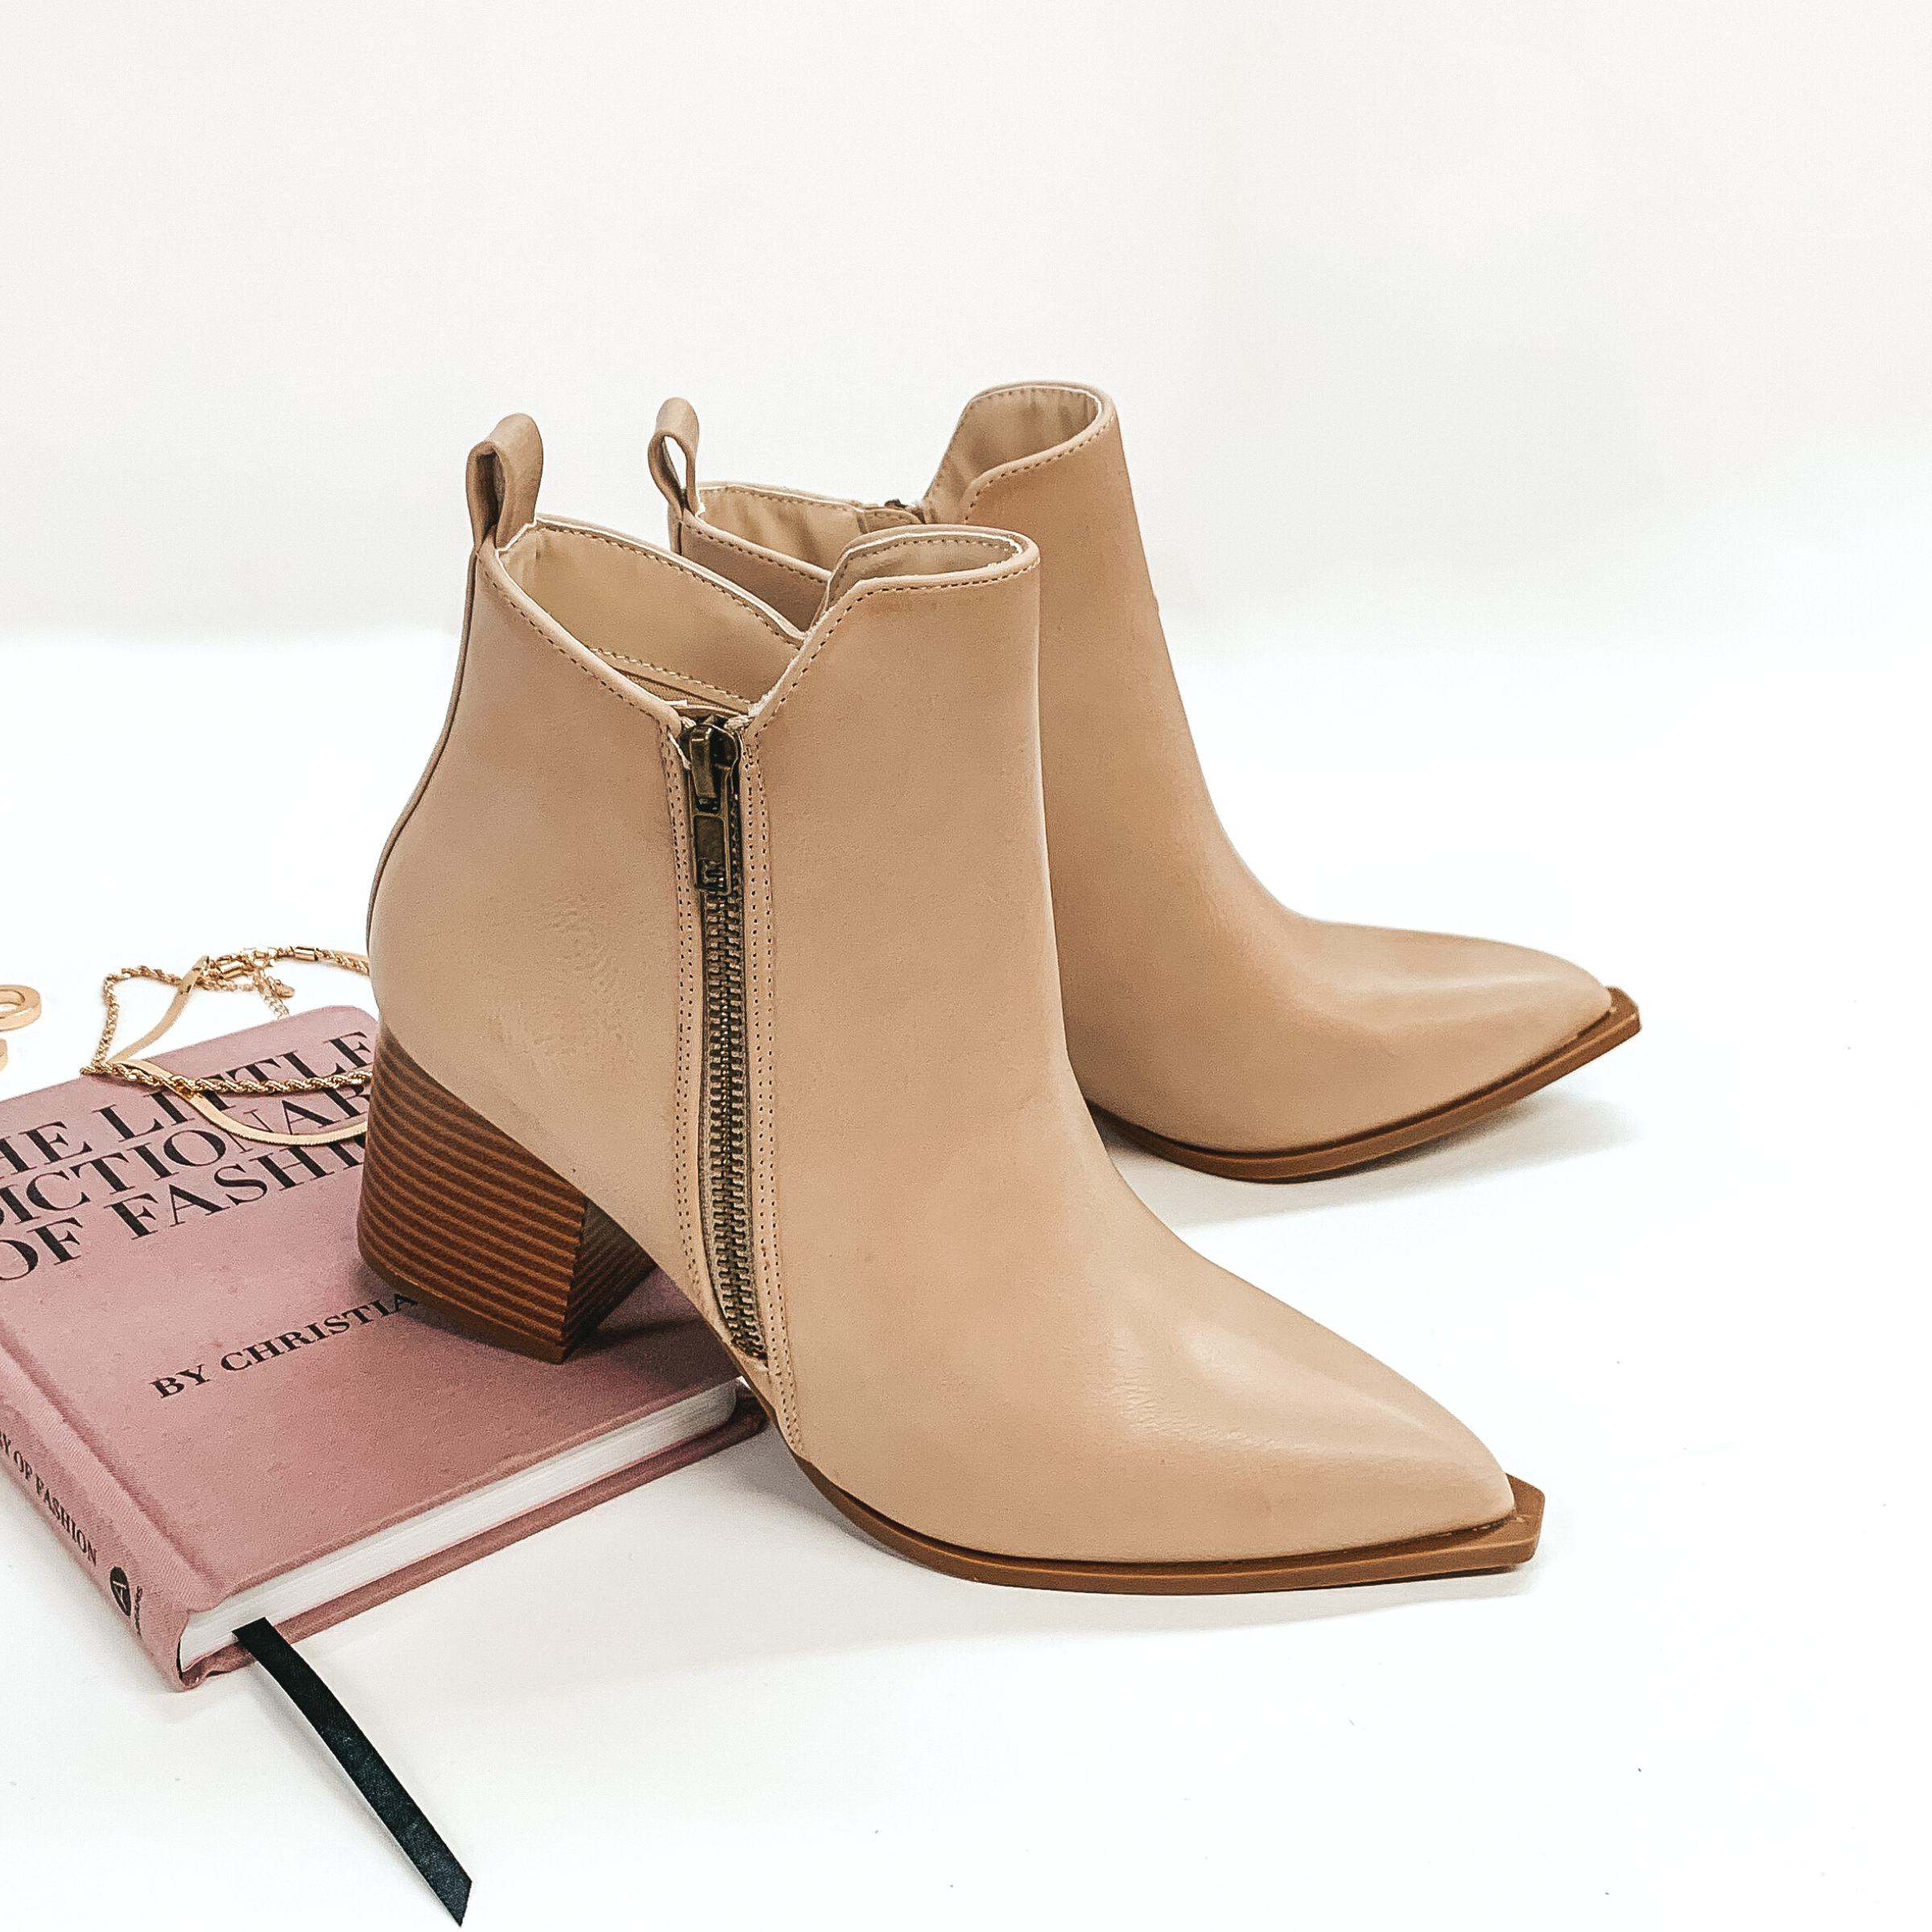 Latte Pick Me Up Heeled Booties with Pointed Toe and Side Zipper in Beige - Giddy Up Glamour Boutique